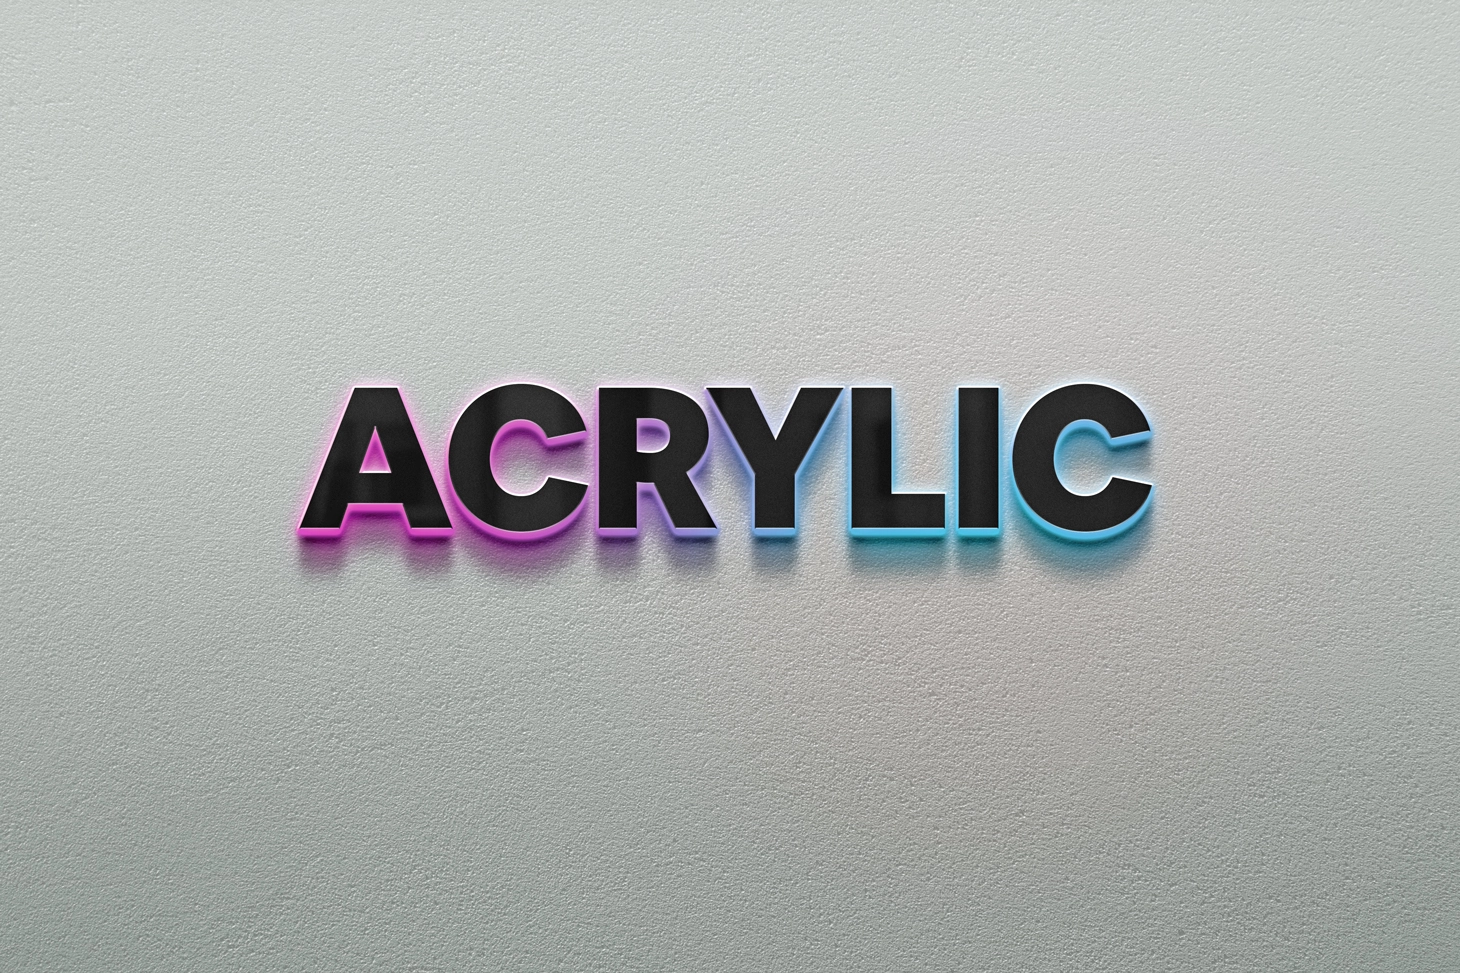 Acylic Signs made with Sign Customiser